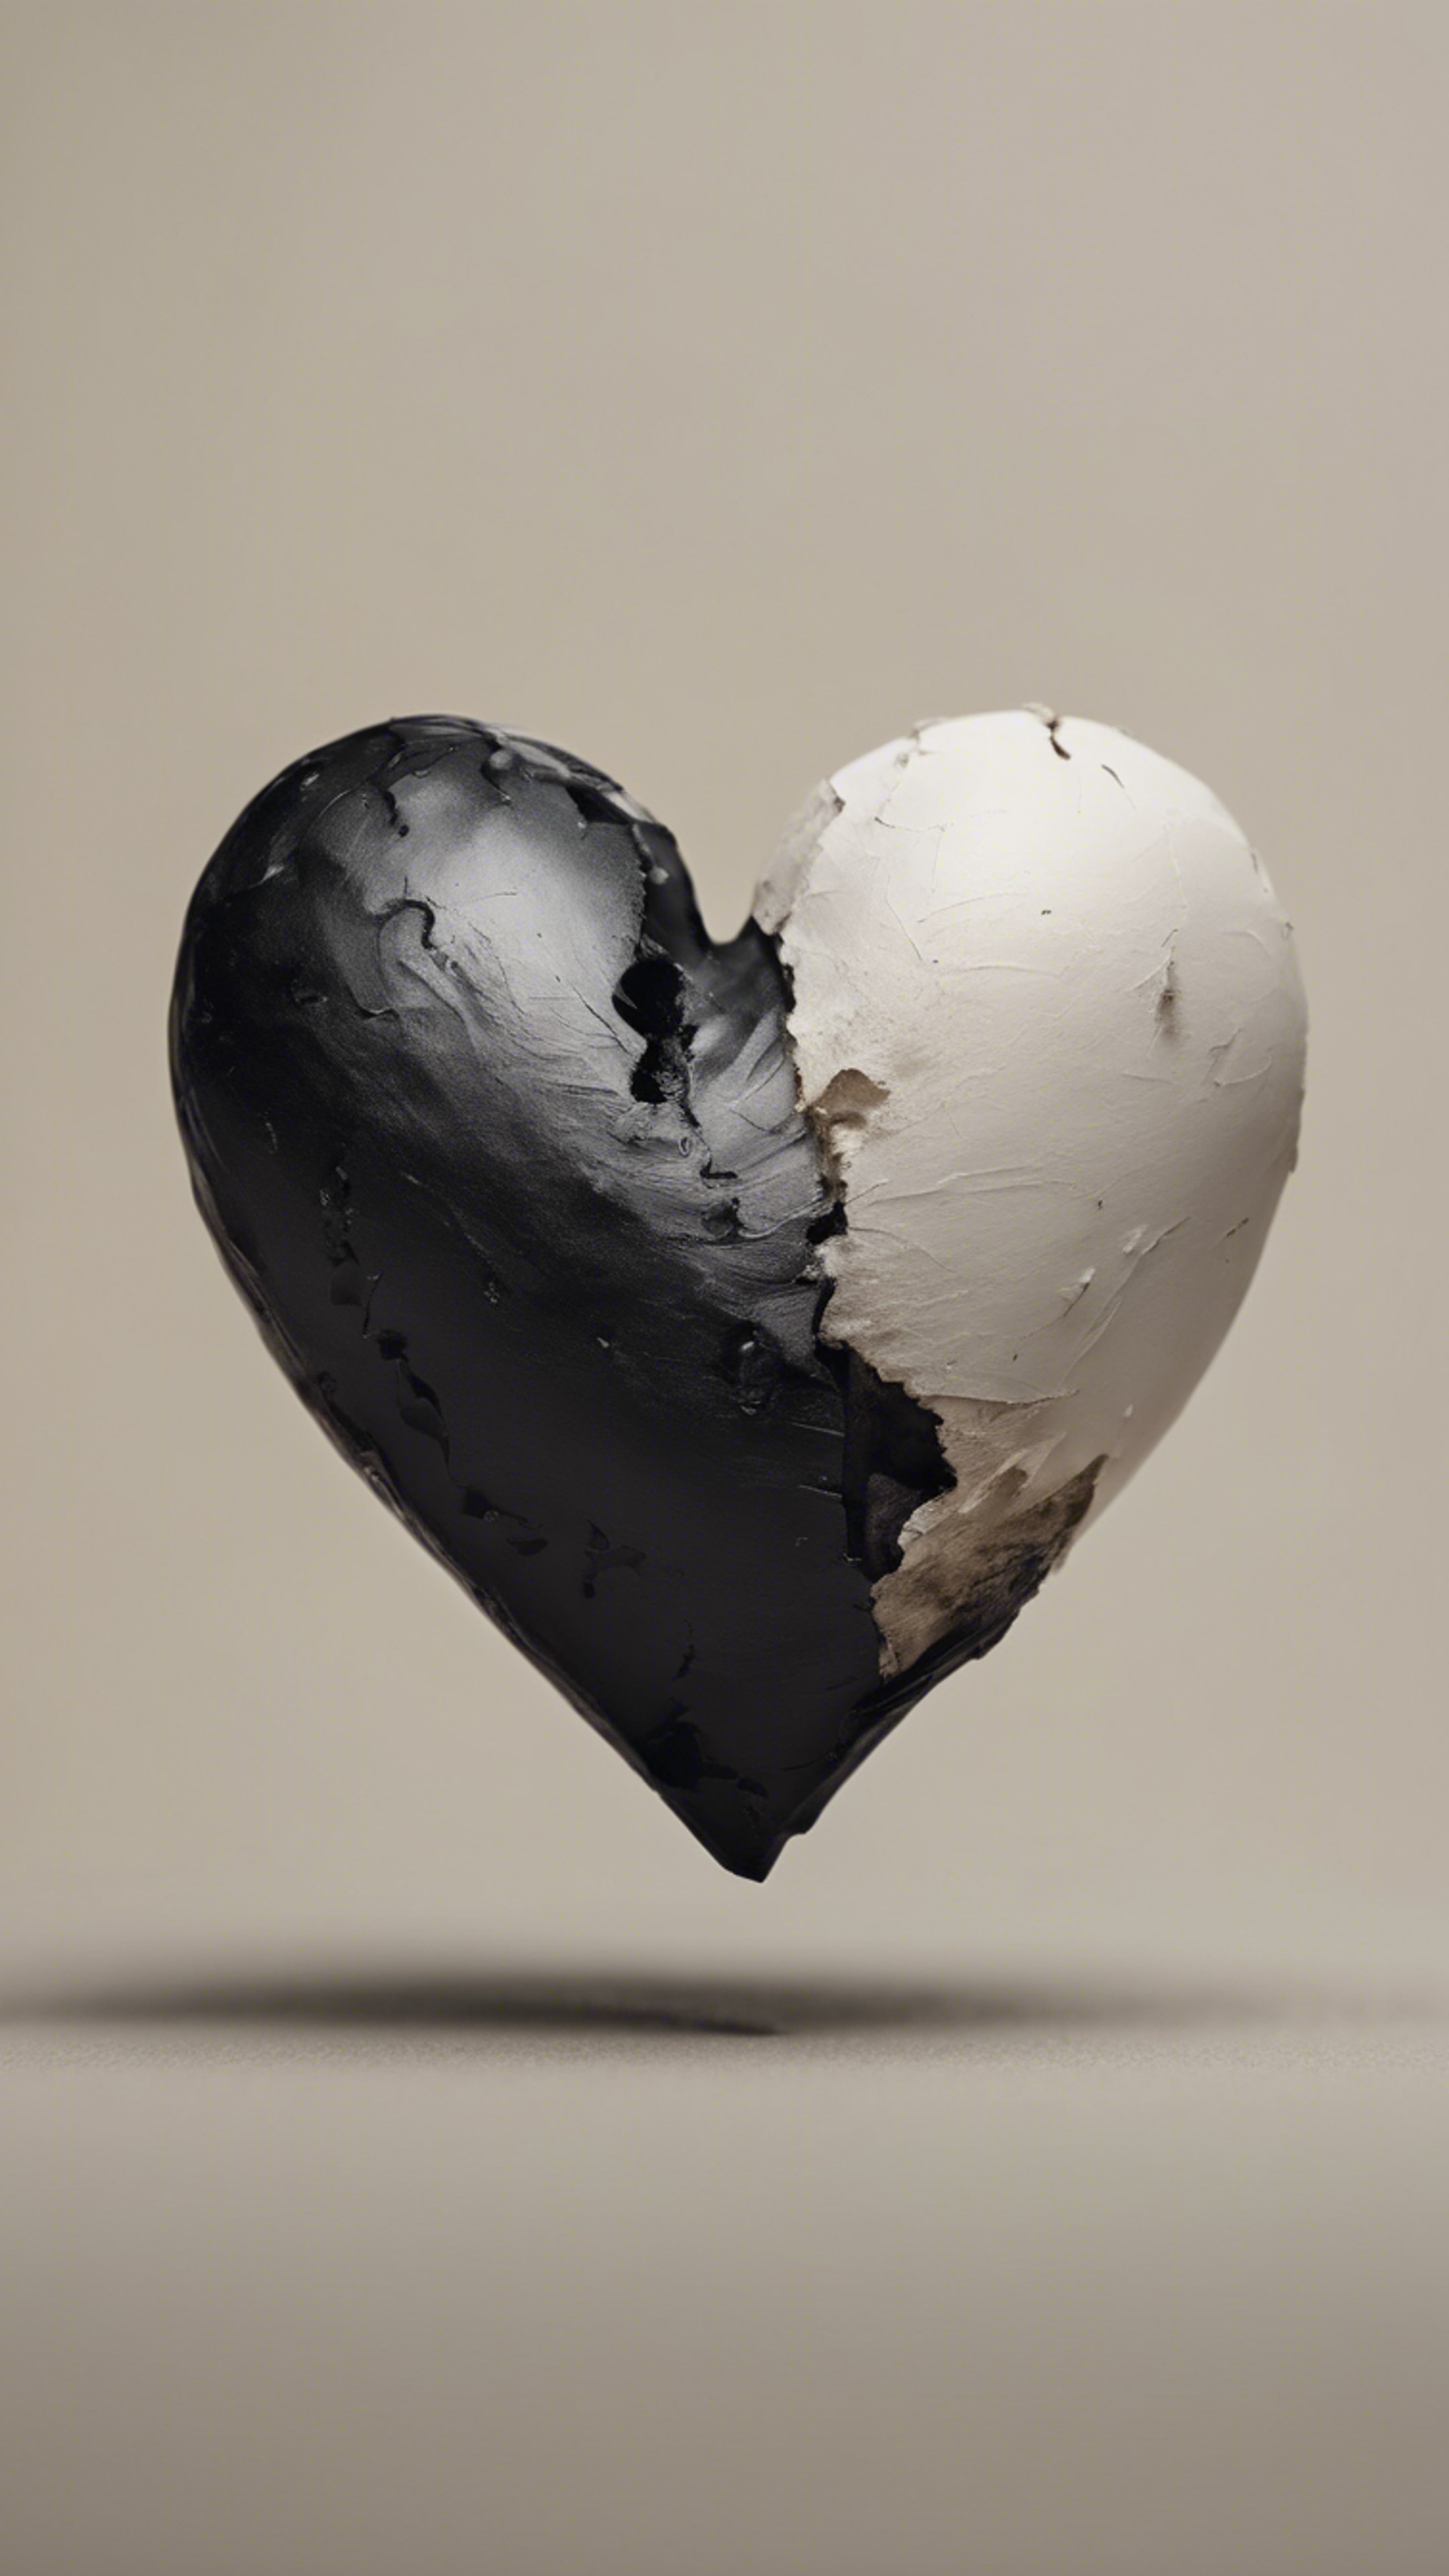 A black heart on one side and a white heart on the other side, against a neutral color background. 牆紙[e1ad96bec27b409fa1a8]